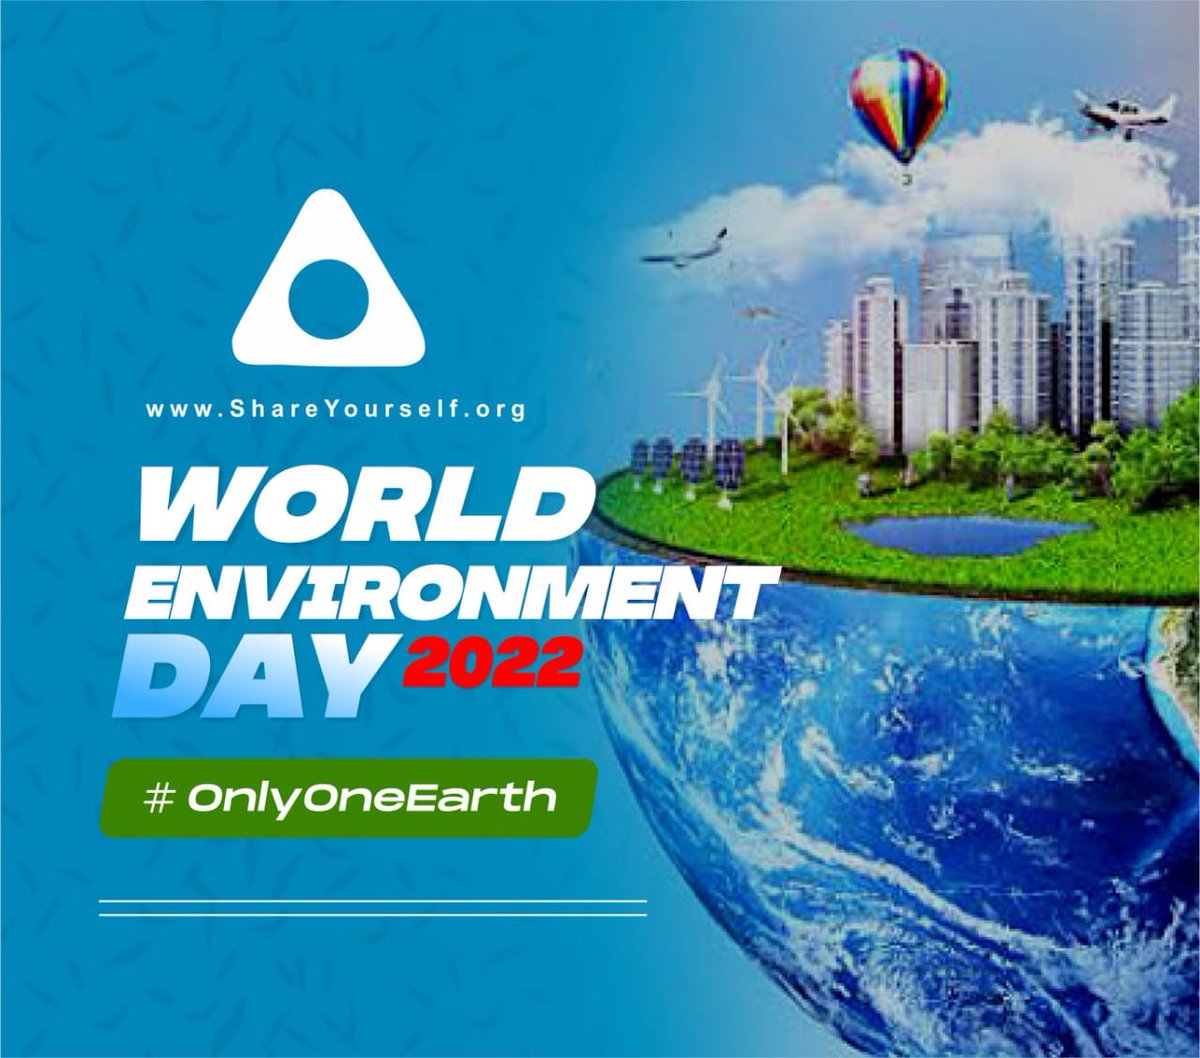 Happy #worldenvironmentday to our community of users, driving #ClimateAction in each #community across the #World . With #OnlyOneEarth , ShareYourself is committed to #ClimateFinance through #GrantFunding for #socialimpact . Let’s protect #PlanetEarth .